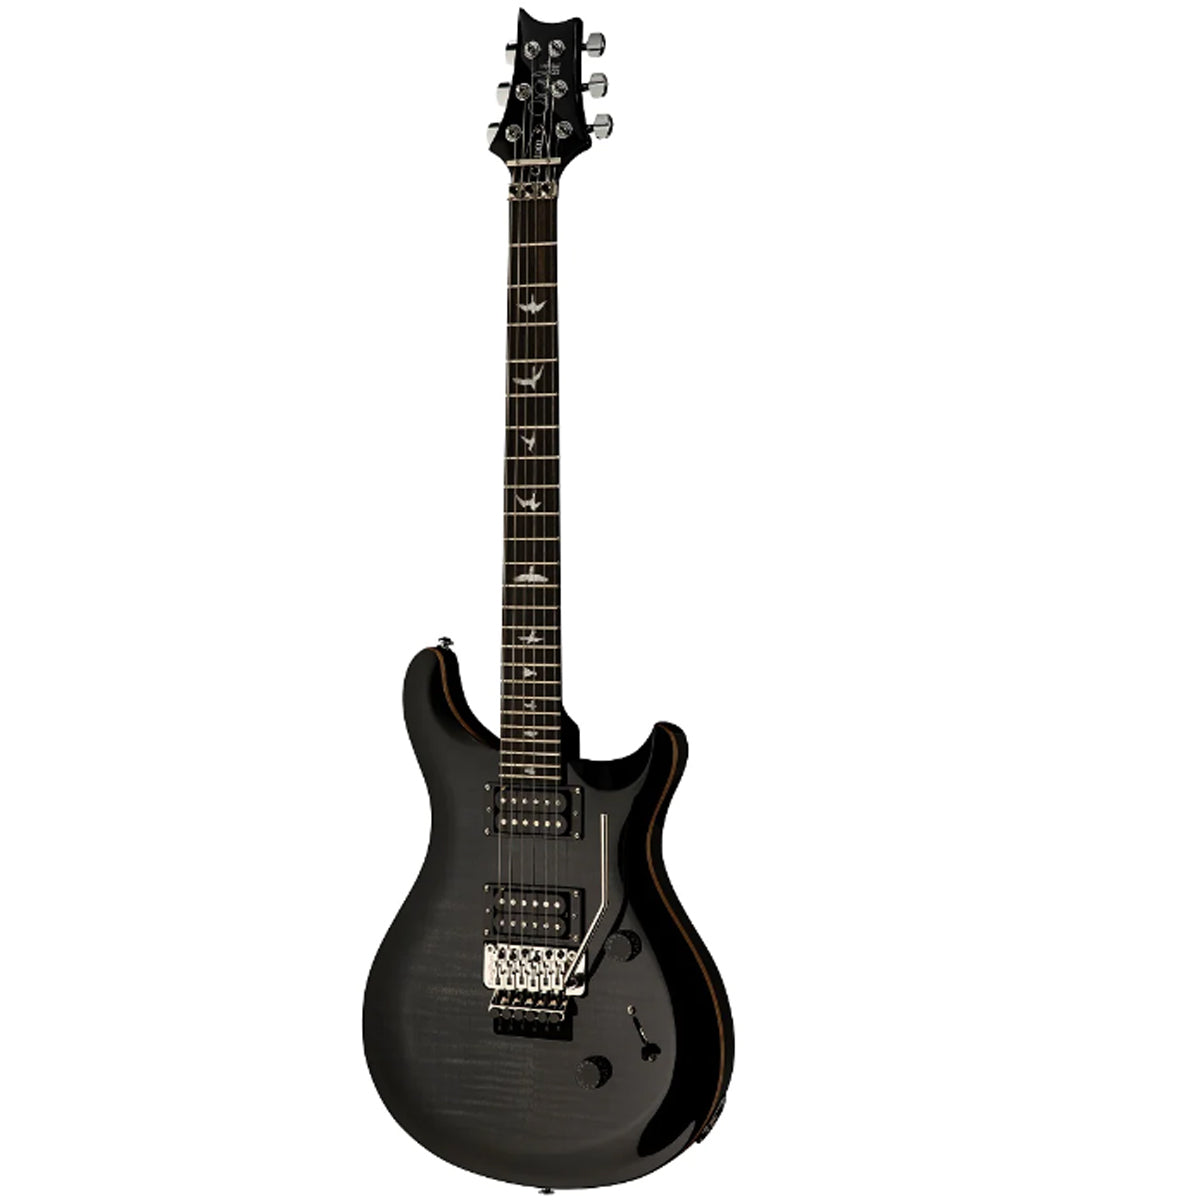 PRS Paul Reed Smith SE Custom 24 Electric Guitar Limited Edition Left Handed Charcoal Burst w/ Floyd Rose & Violin Top Carve